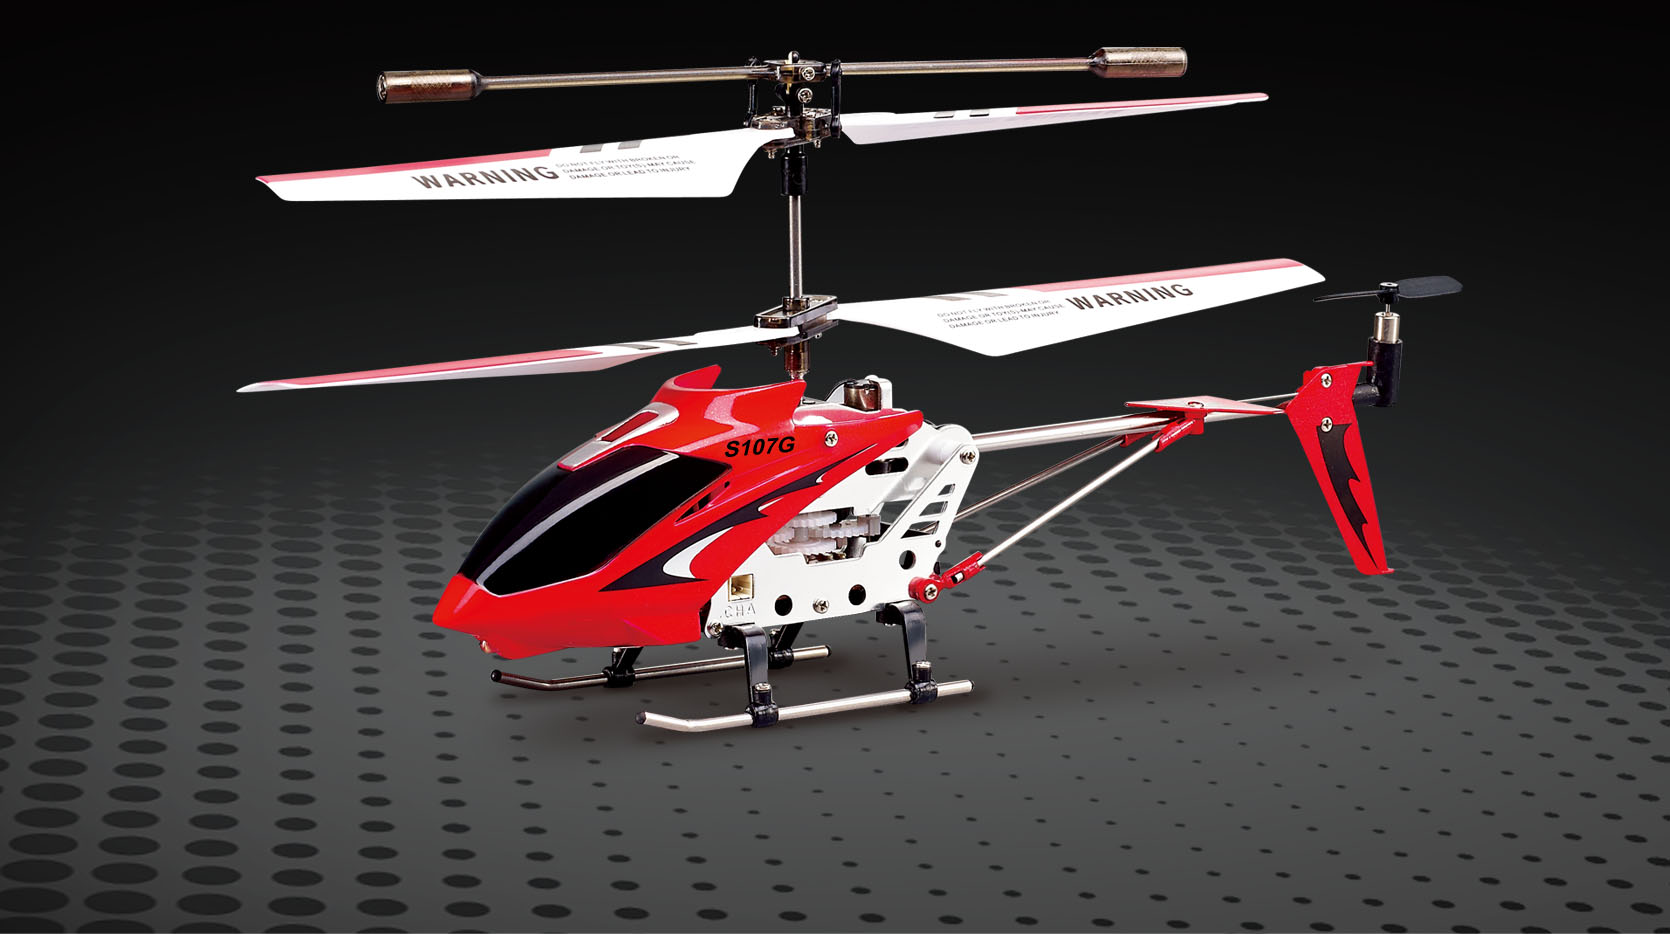 syma 107g rc helicopter